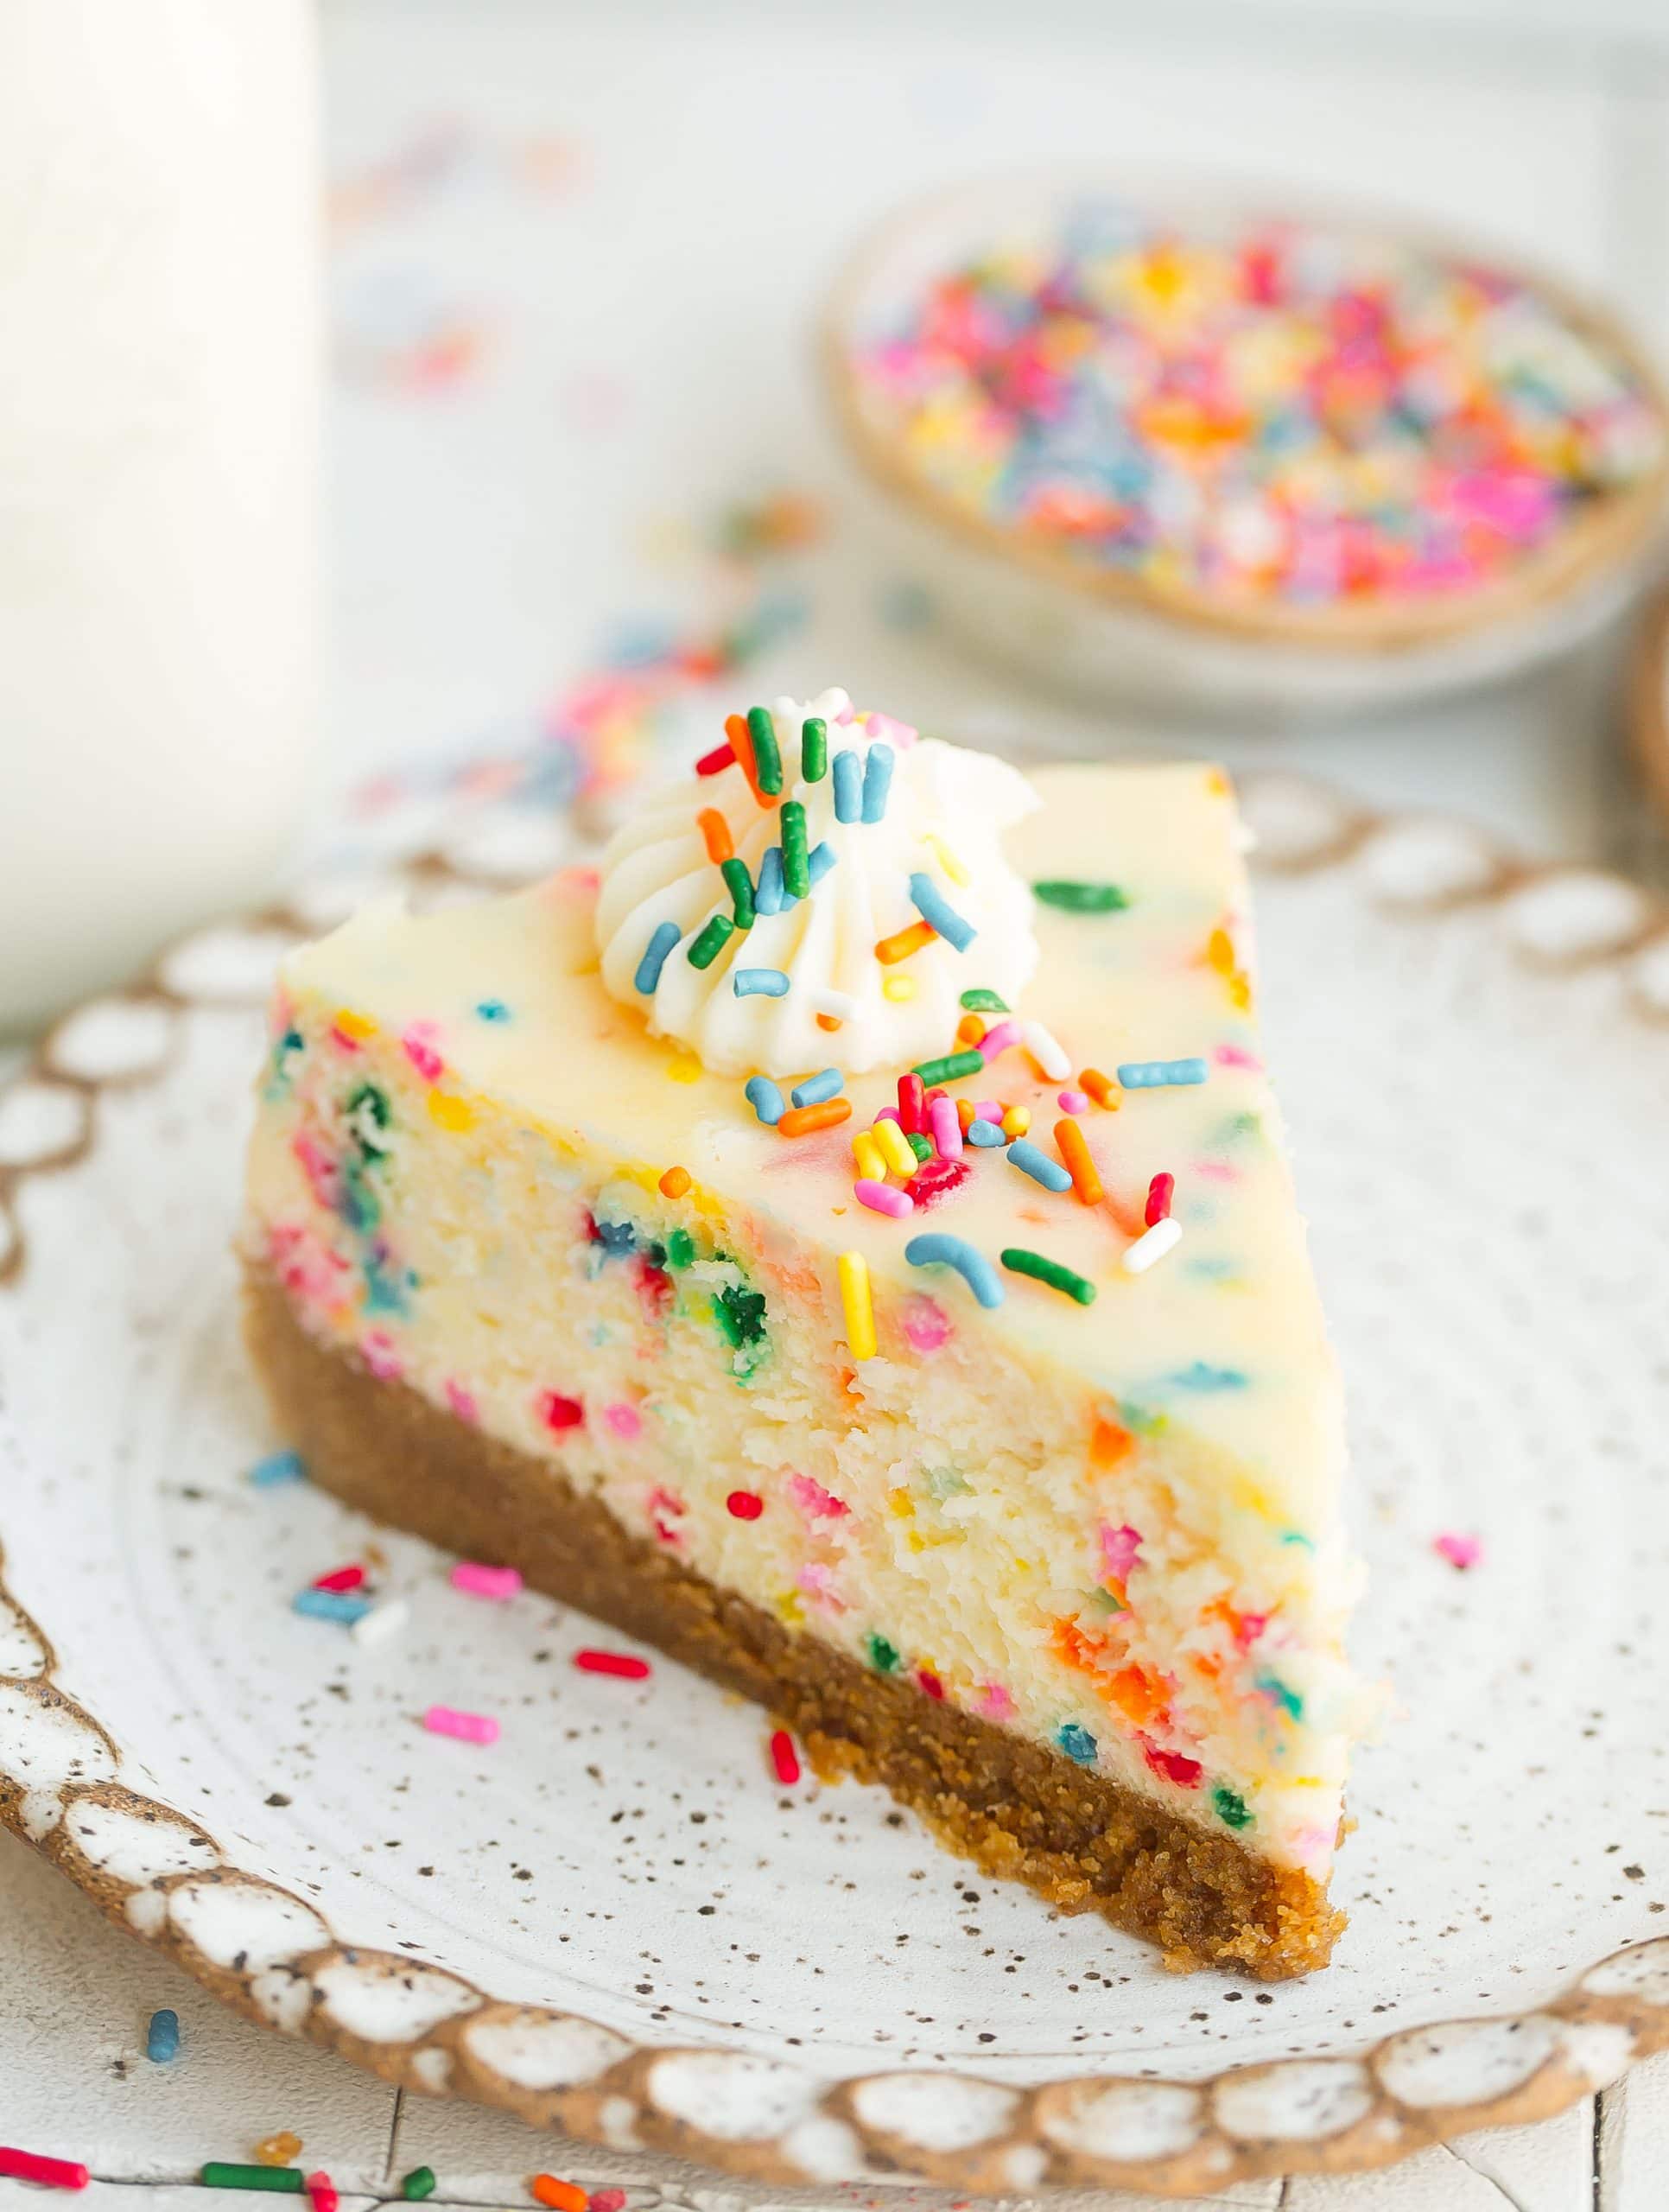 Slice of cheesecake on plate with sprinkles.